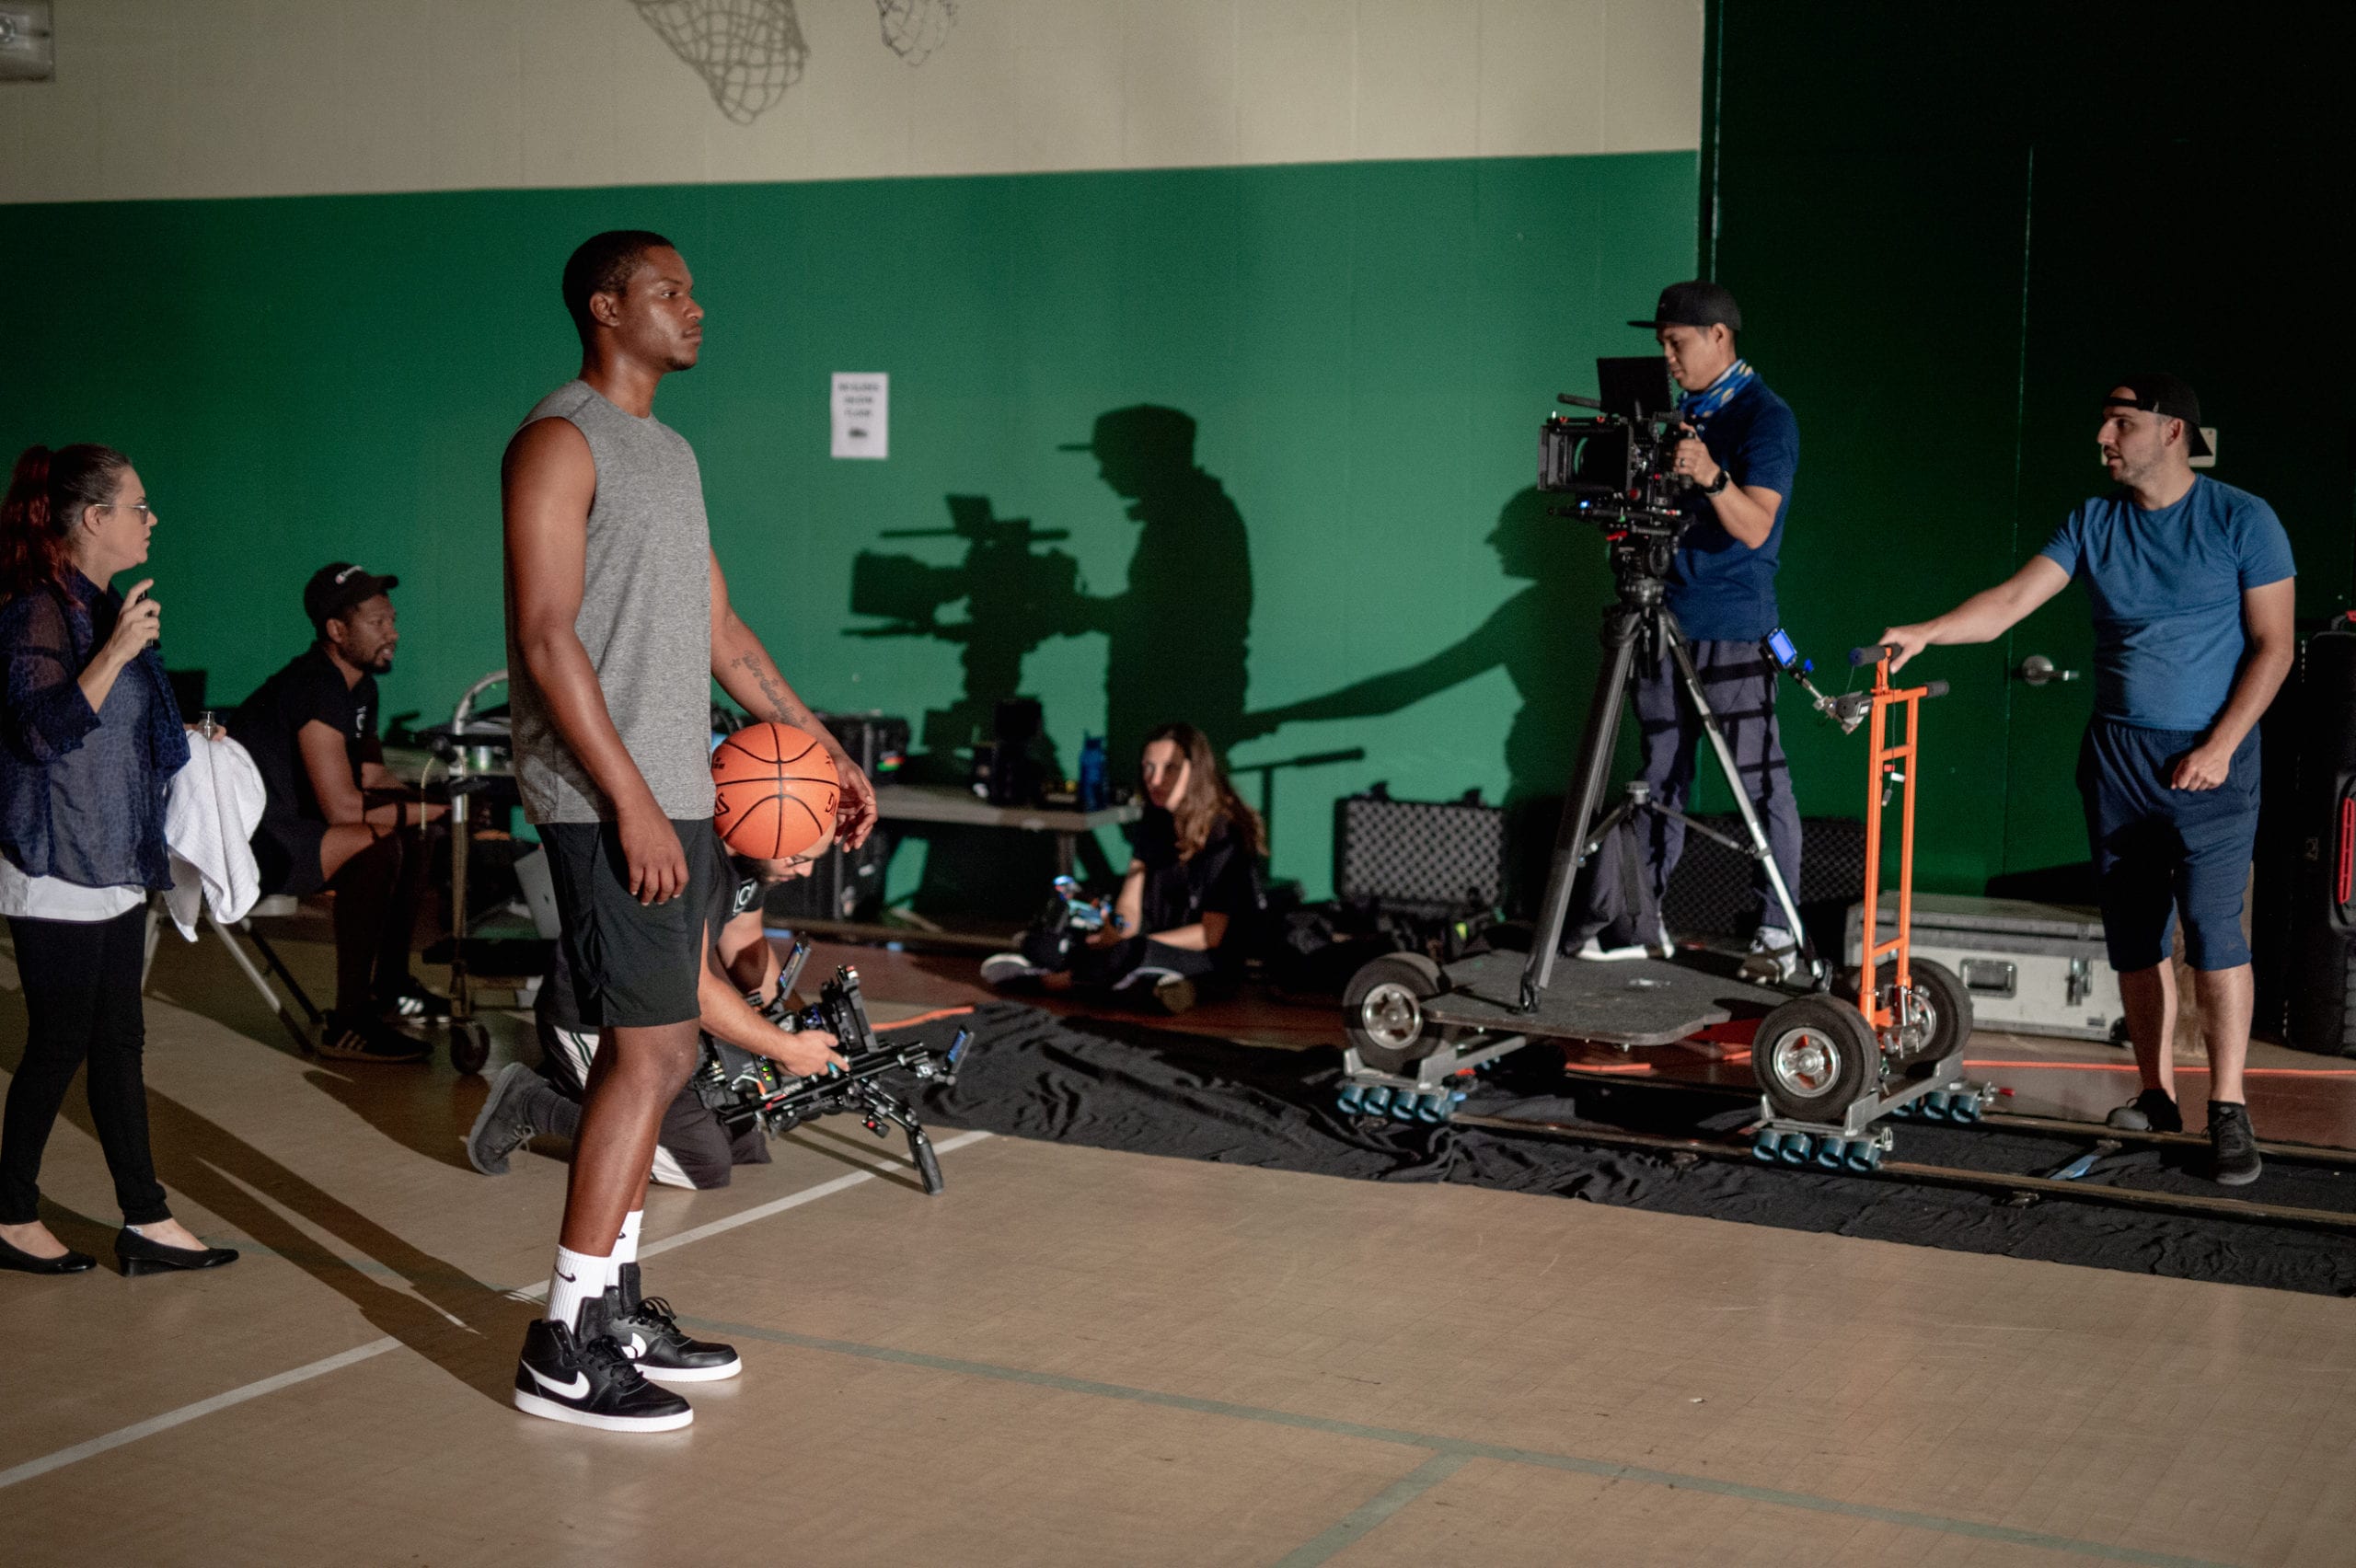 Video Production Behind the Scene being filmed on a basketball court in a gym with an African American man wearing a gray t shirt holding a ball surrounded by a film crew